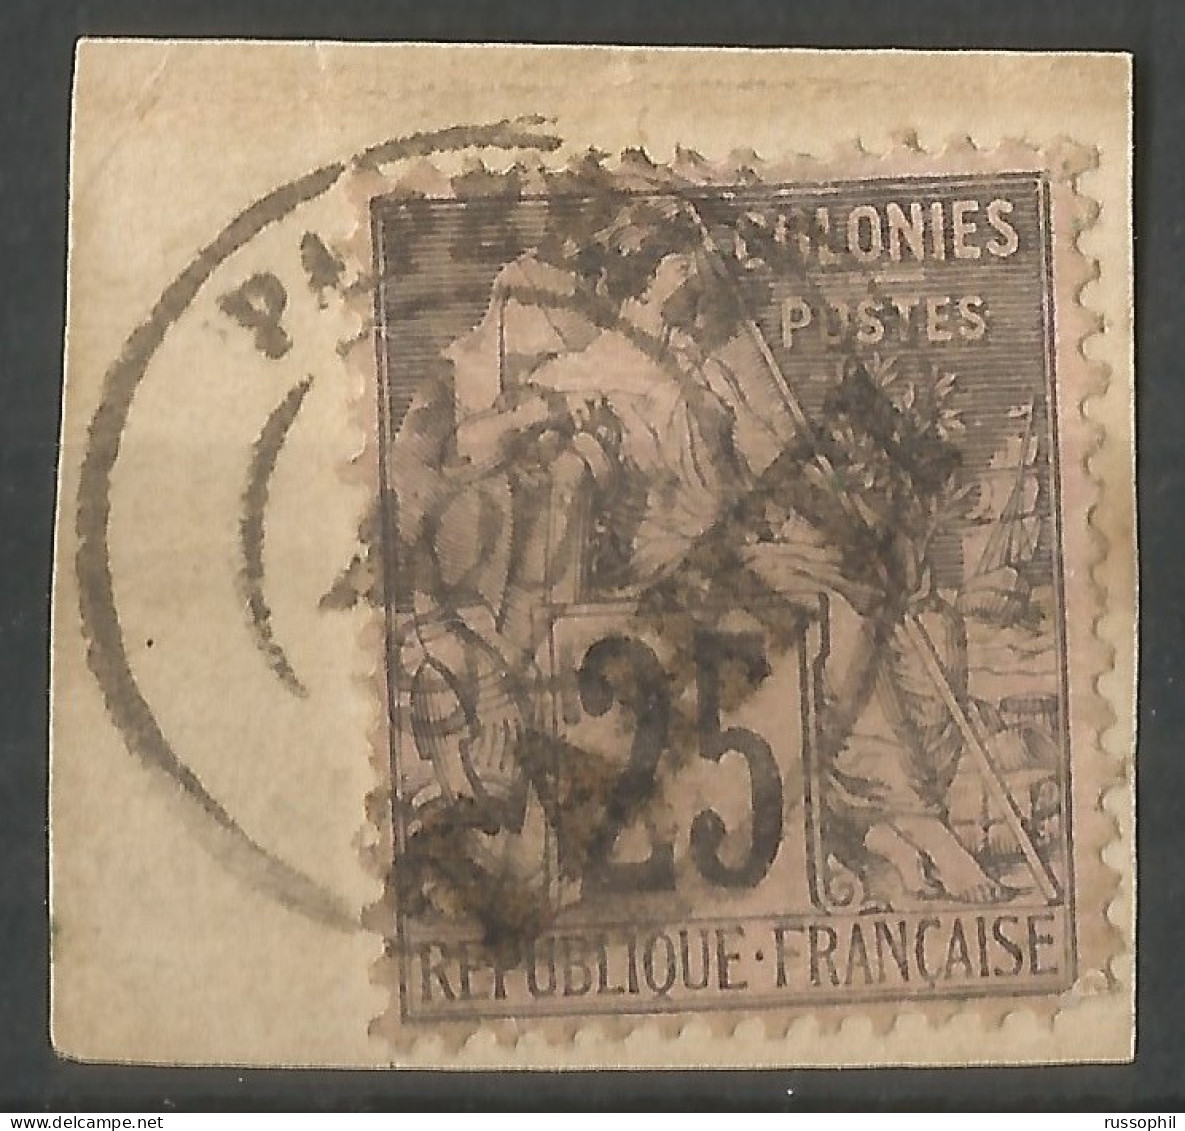 TAHITI - GENERAL COLONIES 25 CENT. OVERCHARGED TAHITI  (Yv. #15) ON FRAGMENT - 1894 - Oblitérés